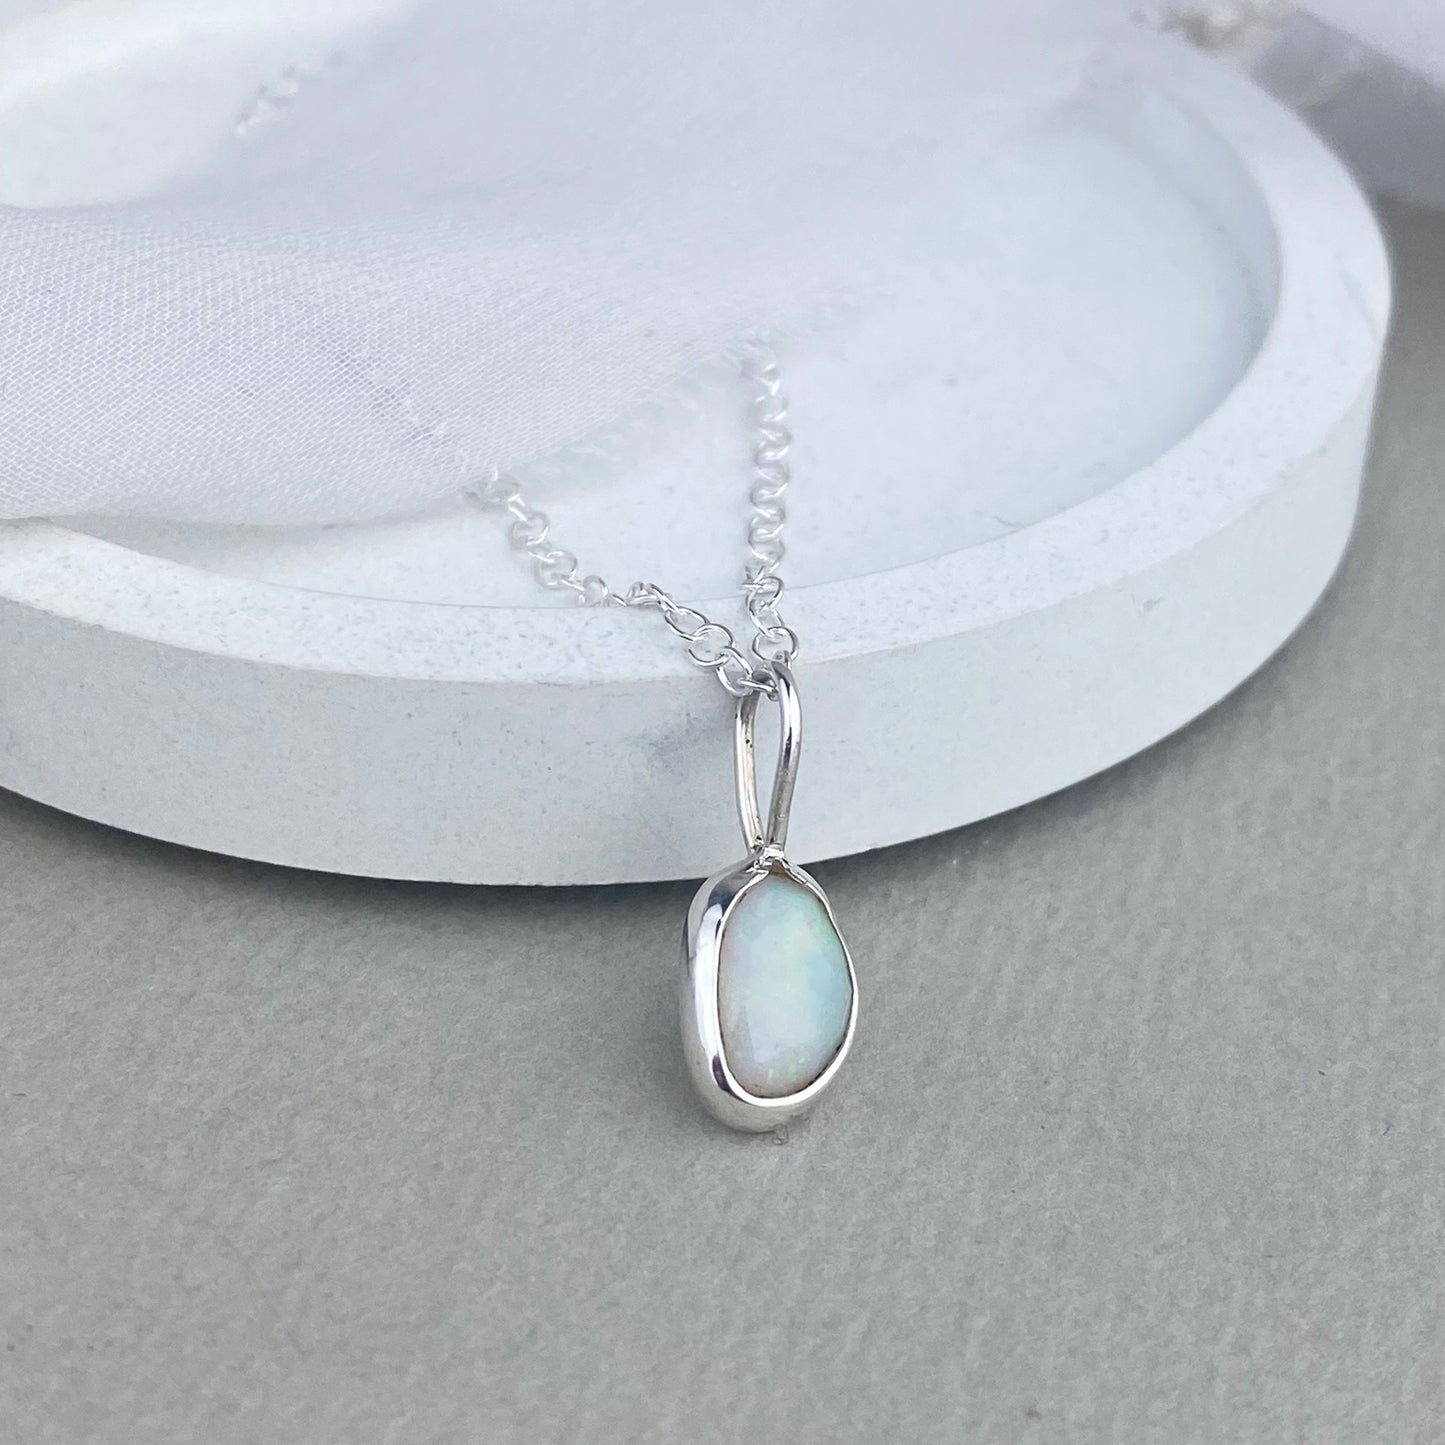 Silver and opal pendant